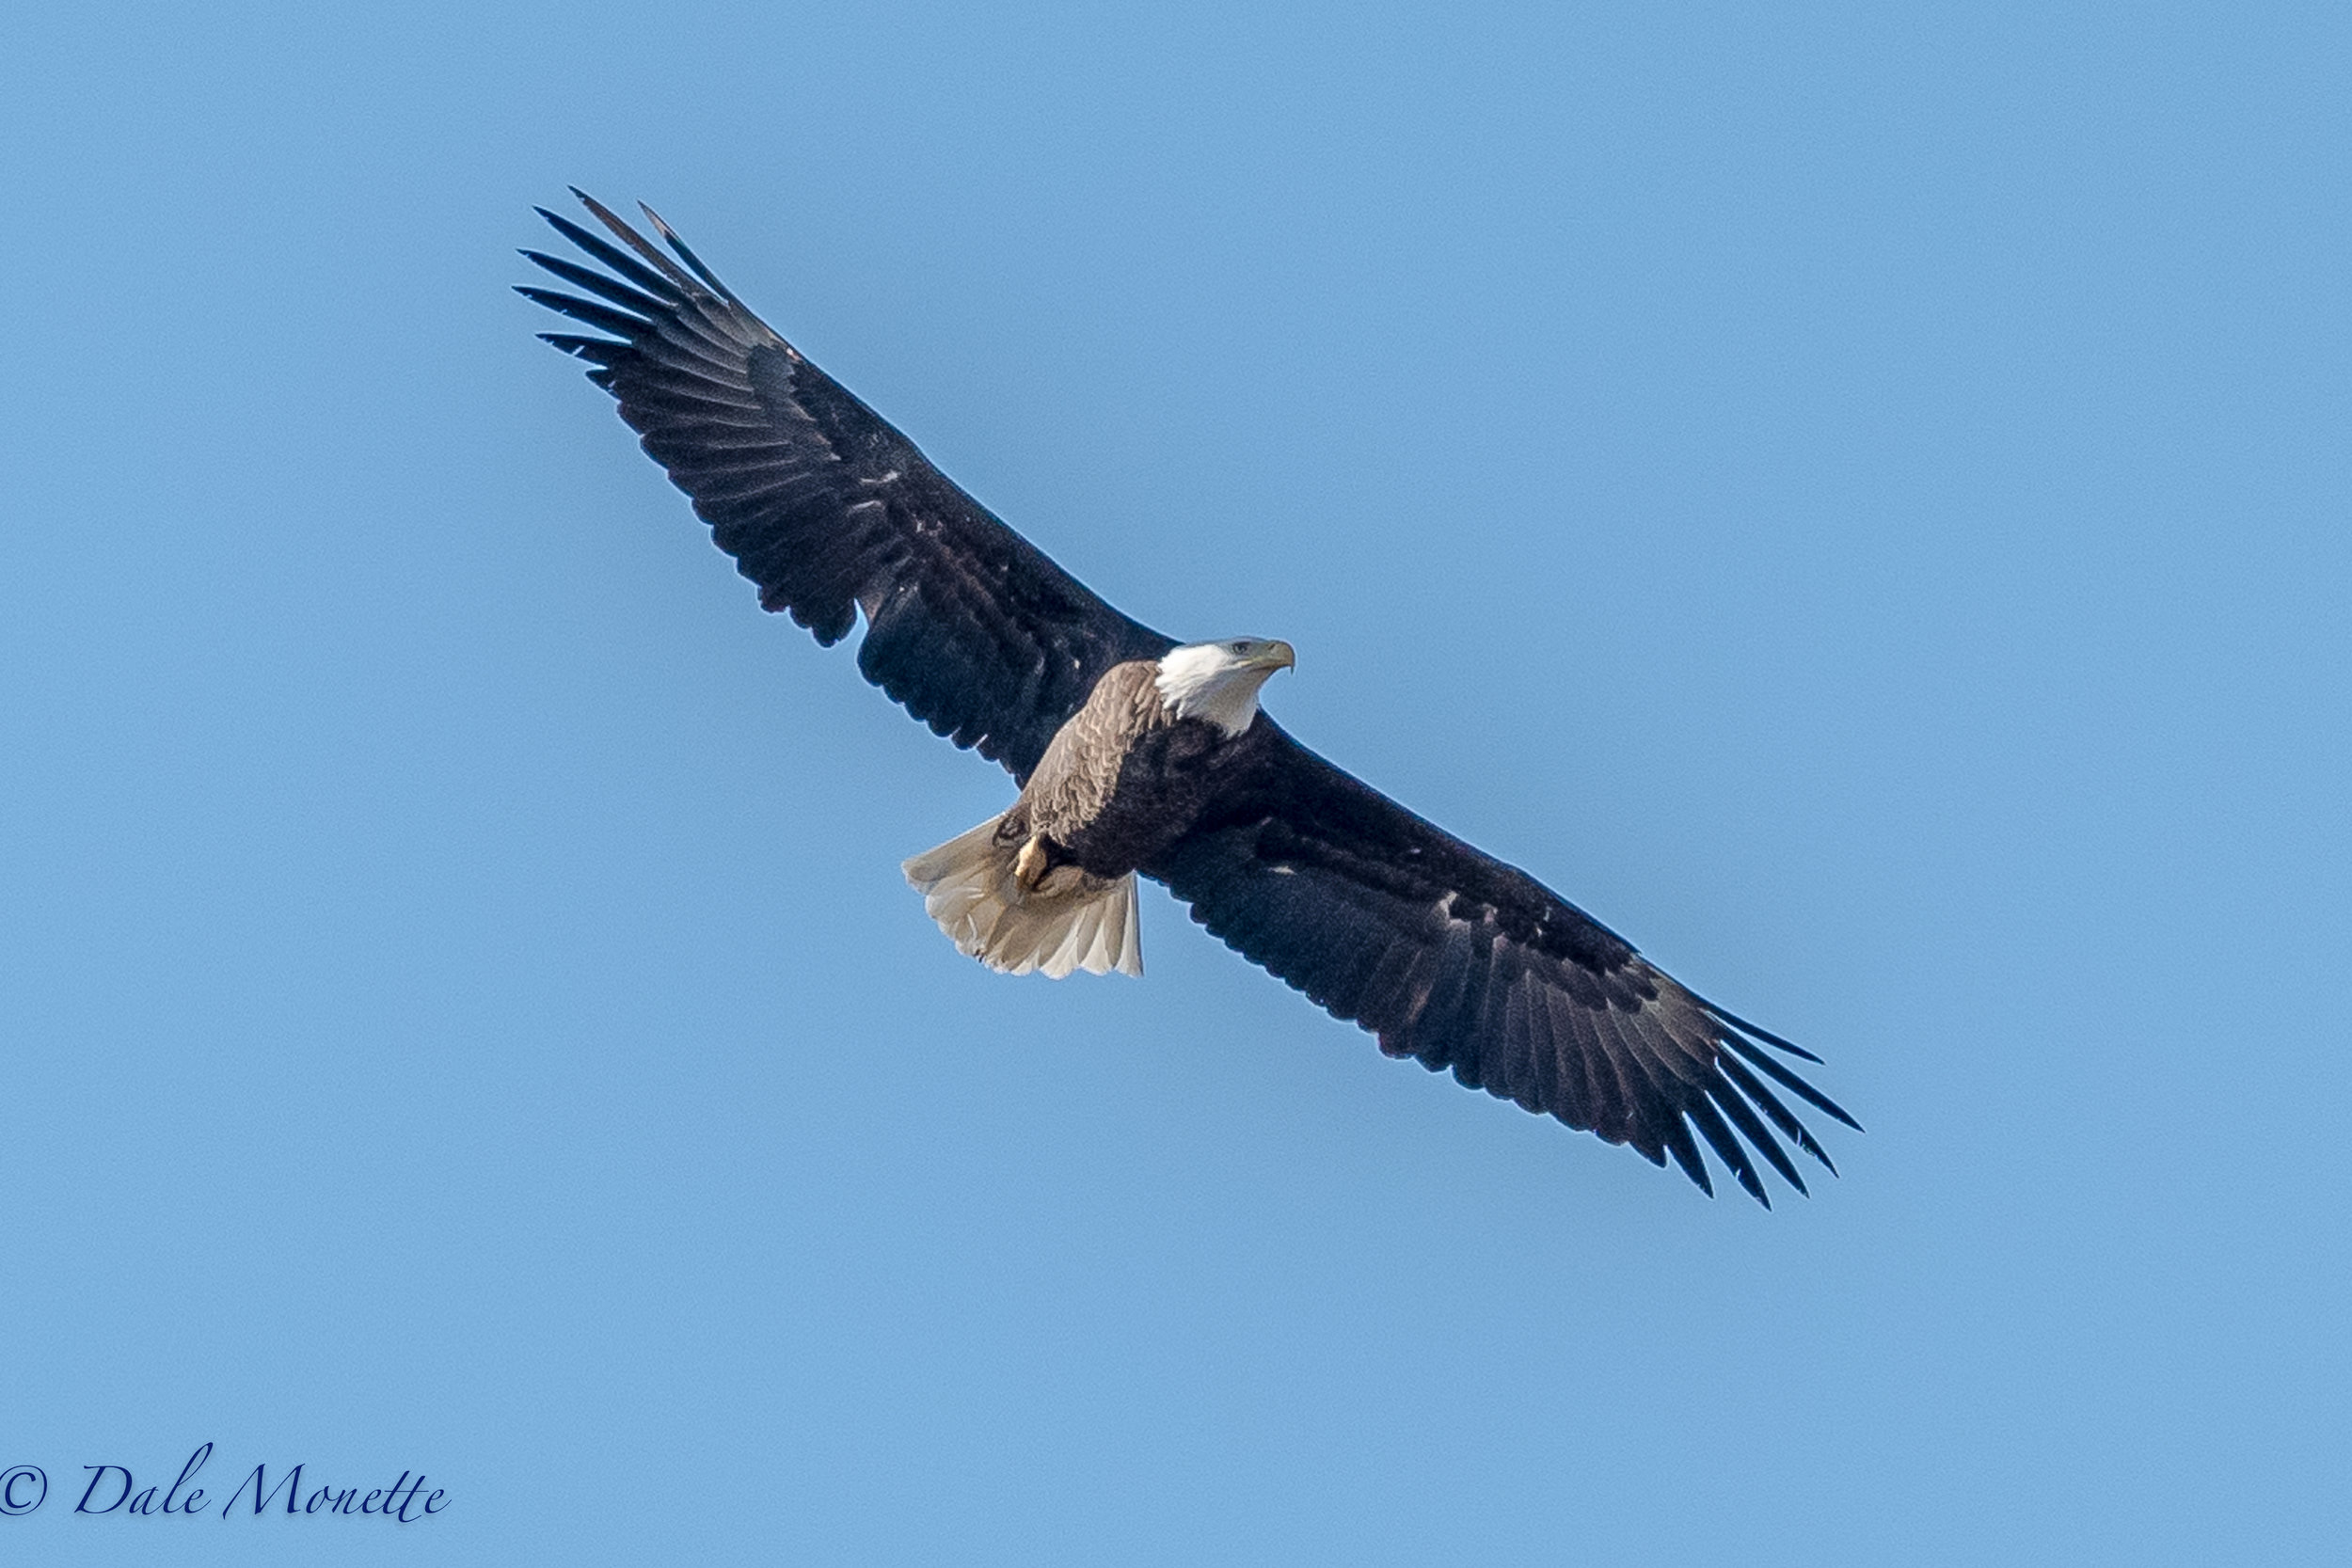   Any day I see a bald eagle is a good day .....This adult was soaring over me at Quabbin along the shore on March 30th, 2017. &nbsp;I had to take a picture :)  